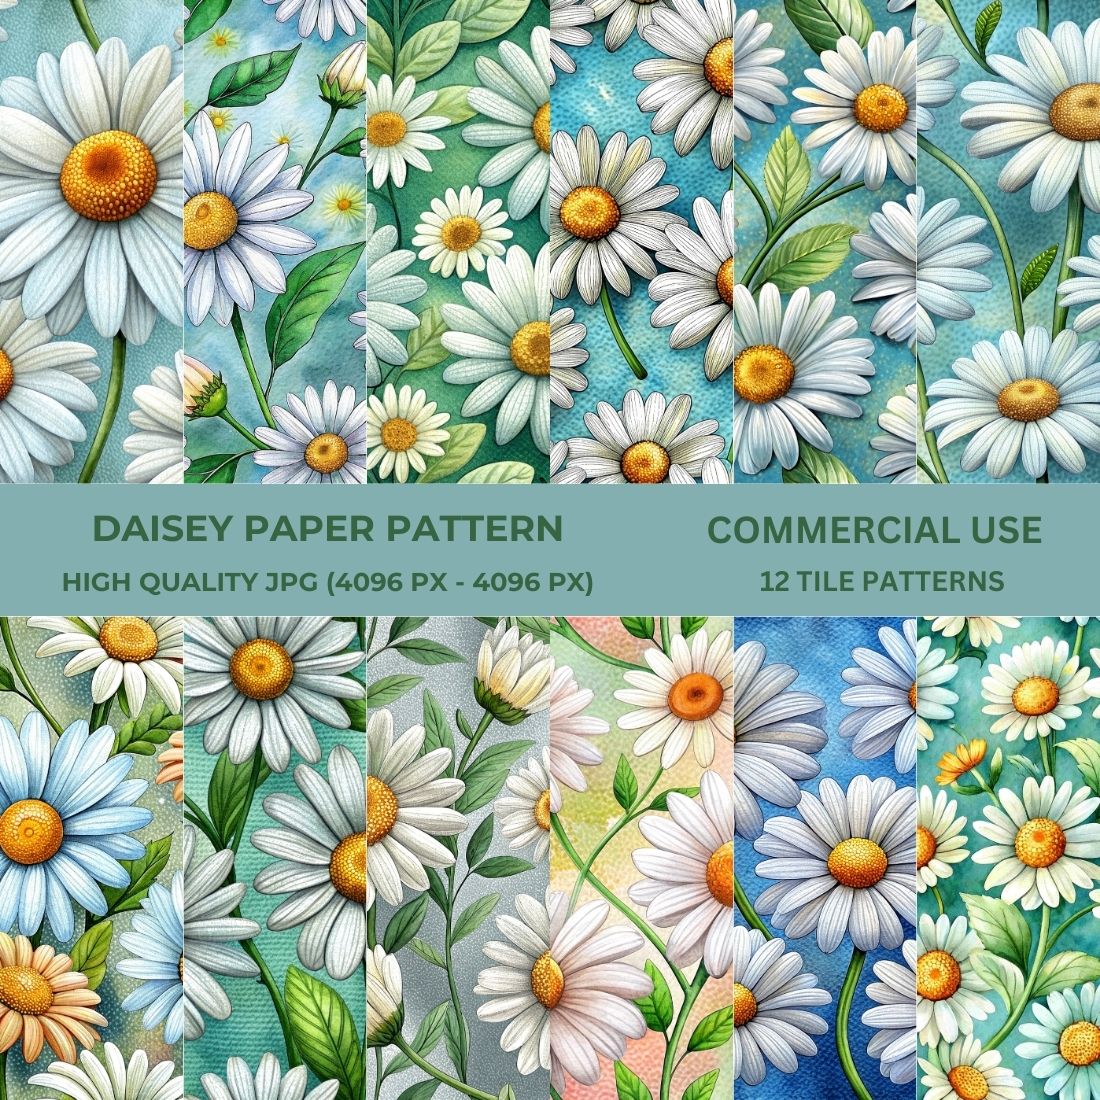 Daisey Paper Pattern Unleash Your Creativity preview image.